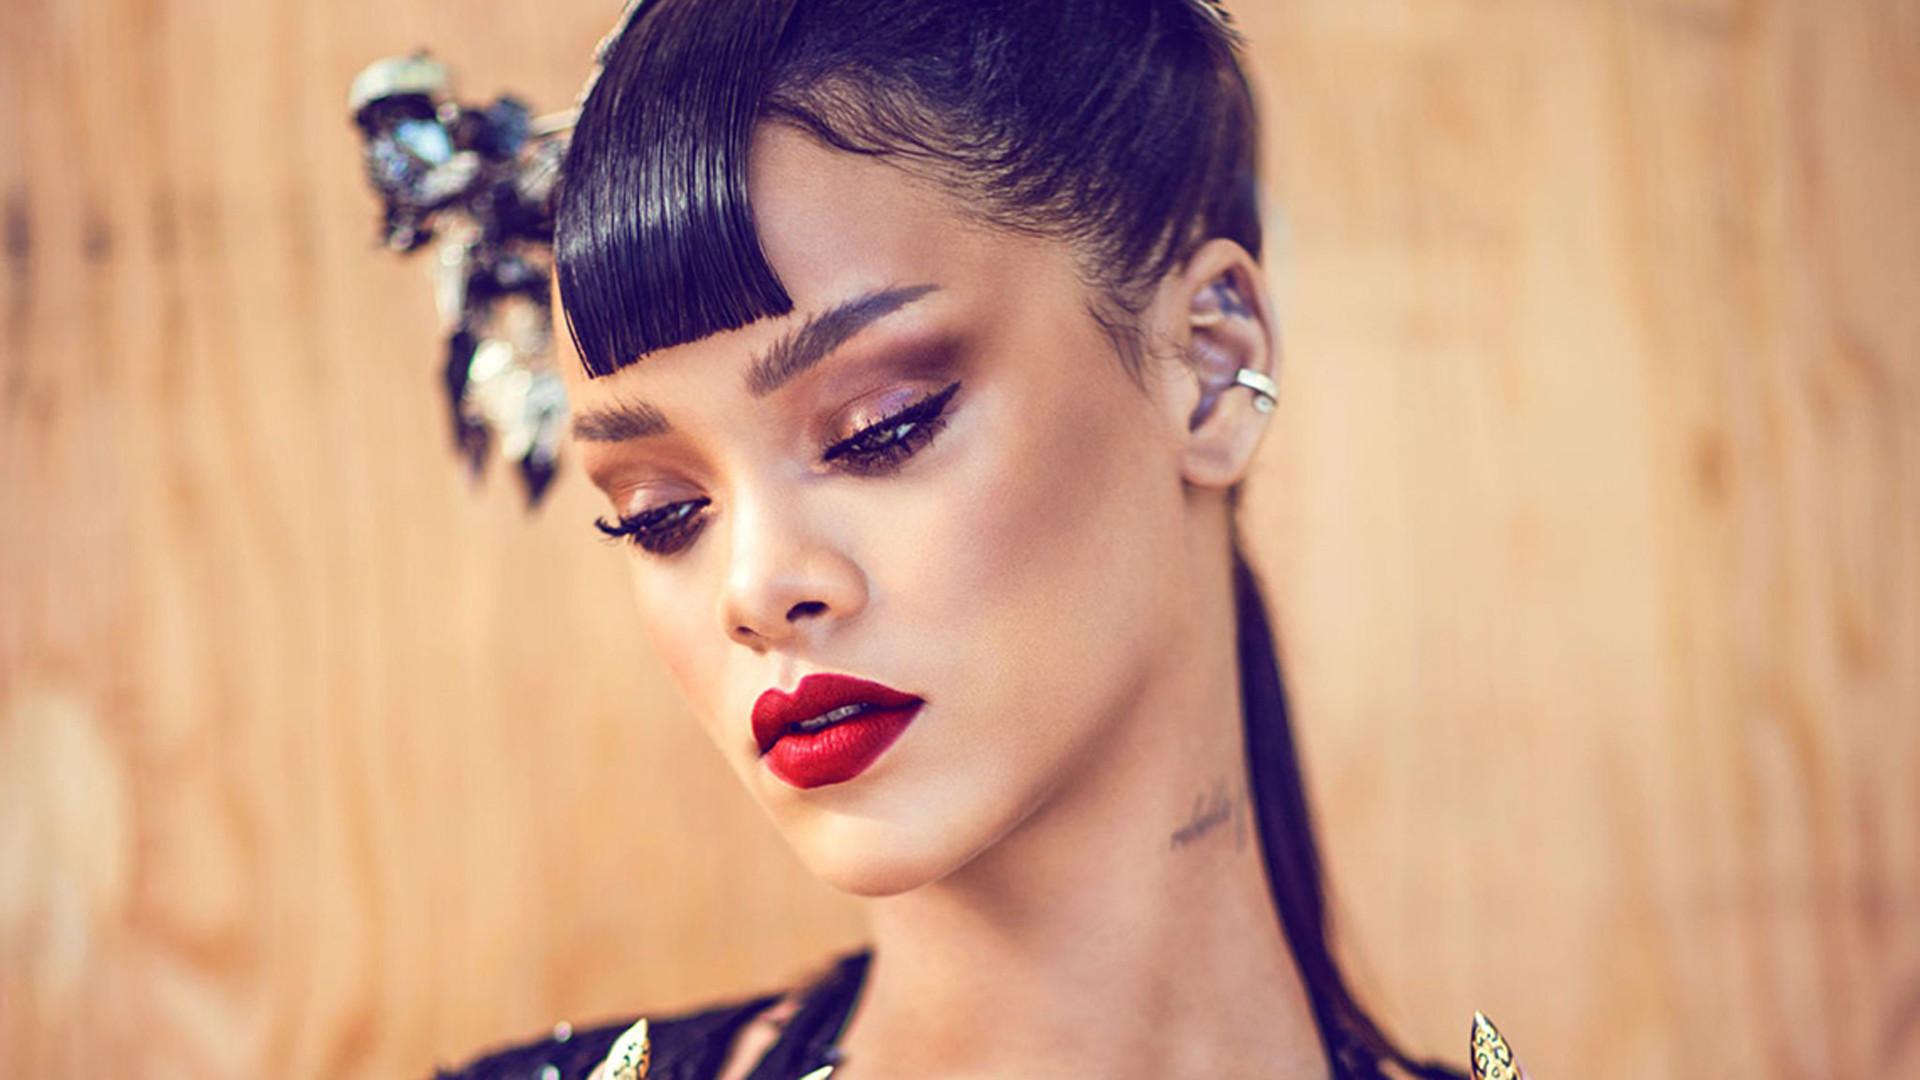 Download Rihanna Hairstyle Wallpaper 65524 1920x1080 px High